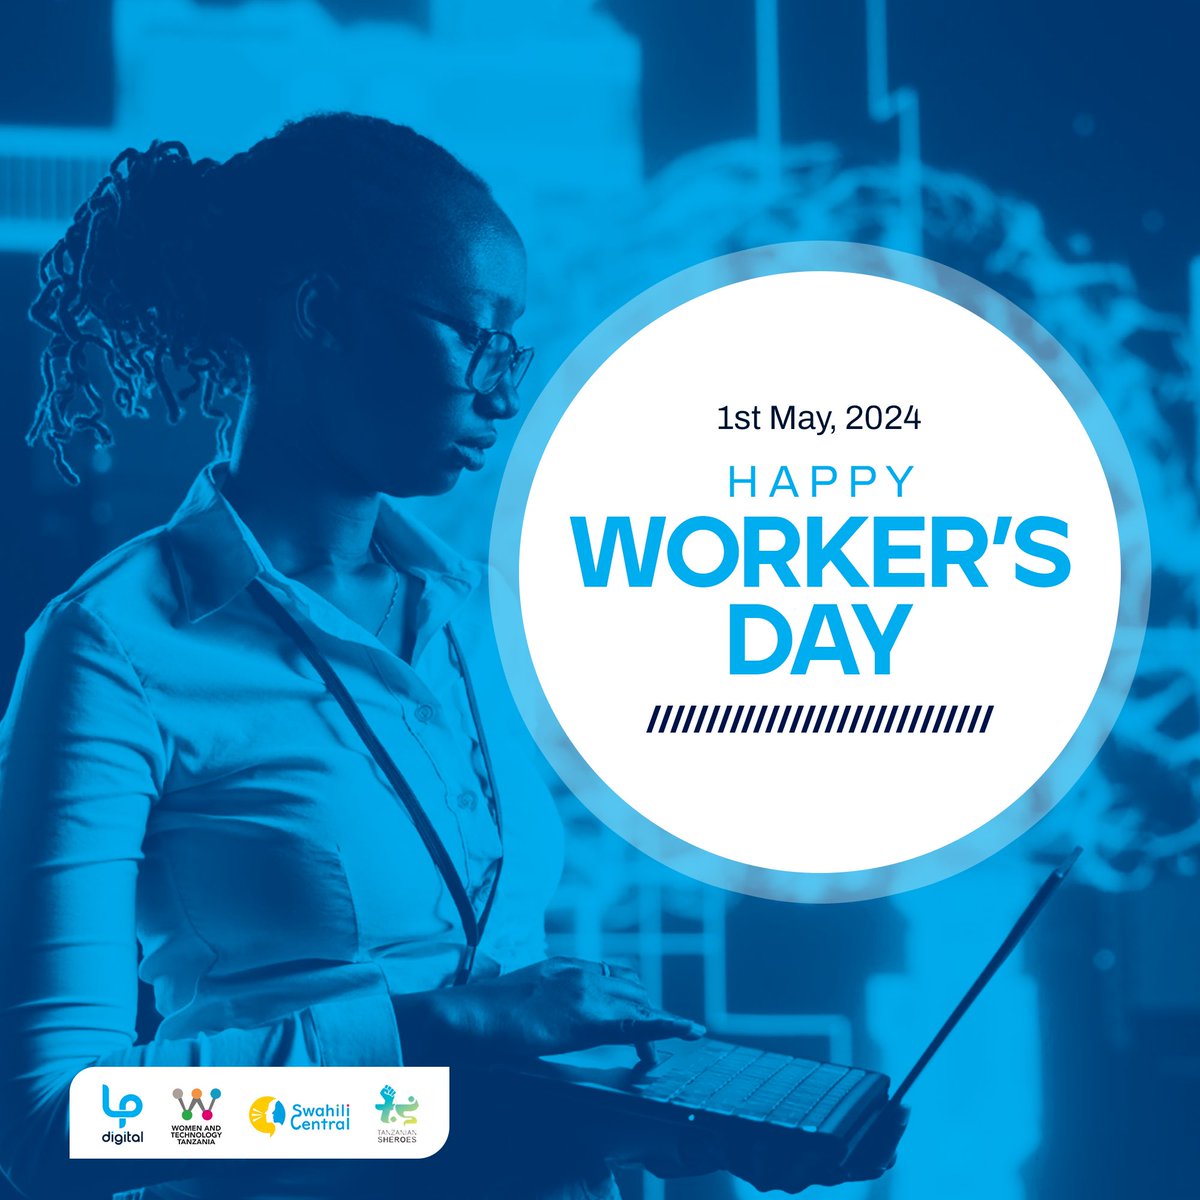 Happy Workers' Day!
Today we celebrate the tireless efforts and achievements of workers worldwide. Your dedication makes a difference!
#MitandaoNaSisi #hakizakidijitali #WorkersDay #LaborDay